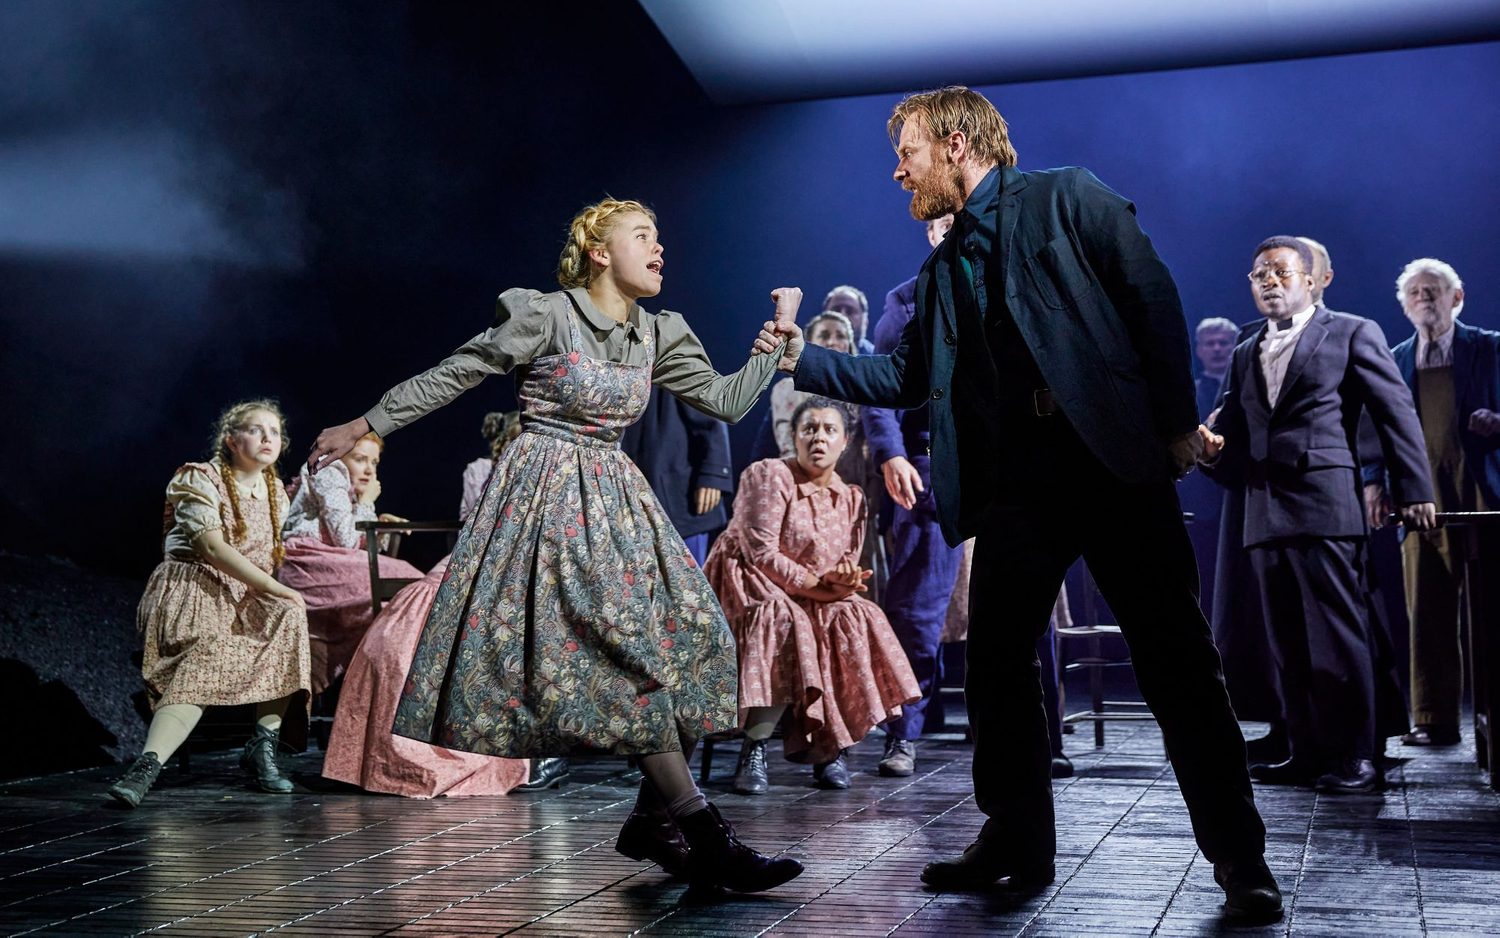 Milly Alcock and Brian Gleeson as Abigail Williams and John Proctor in The Crucible